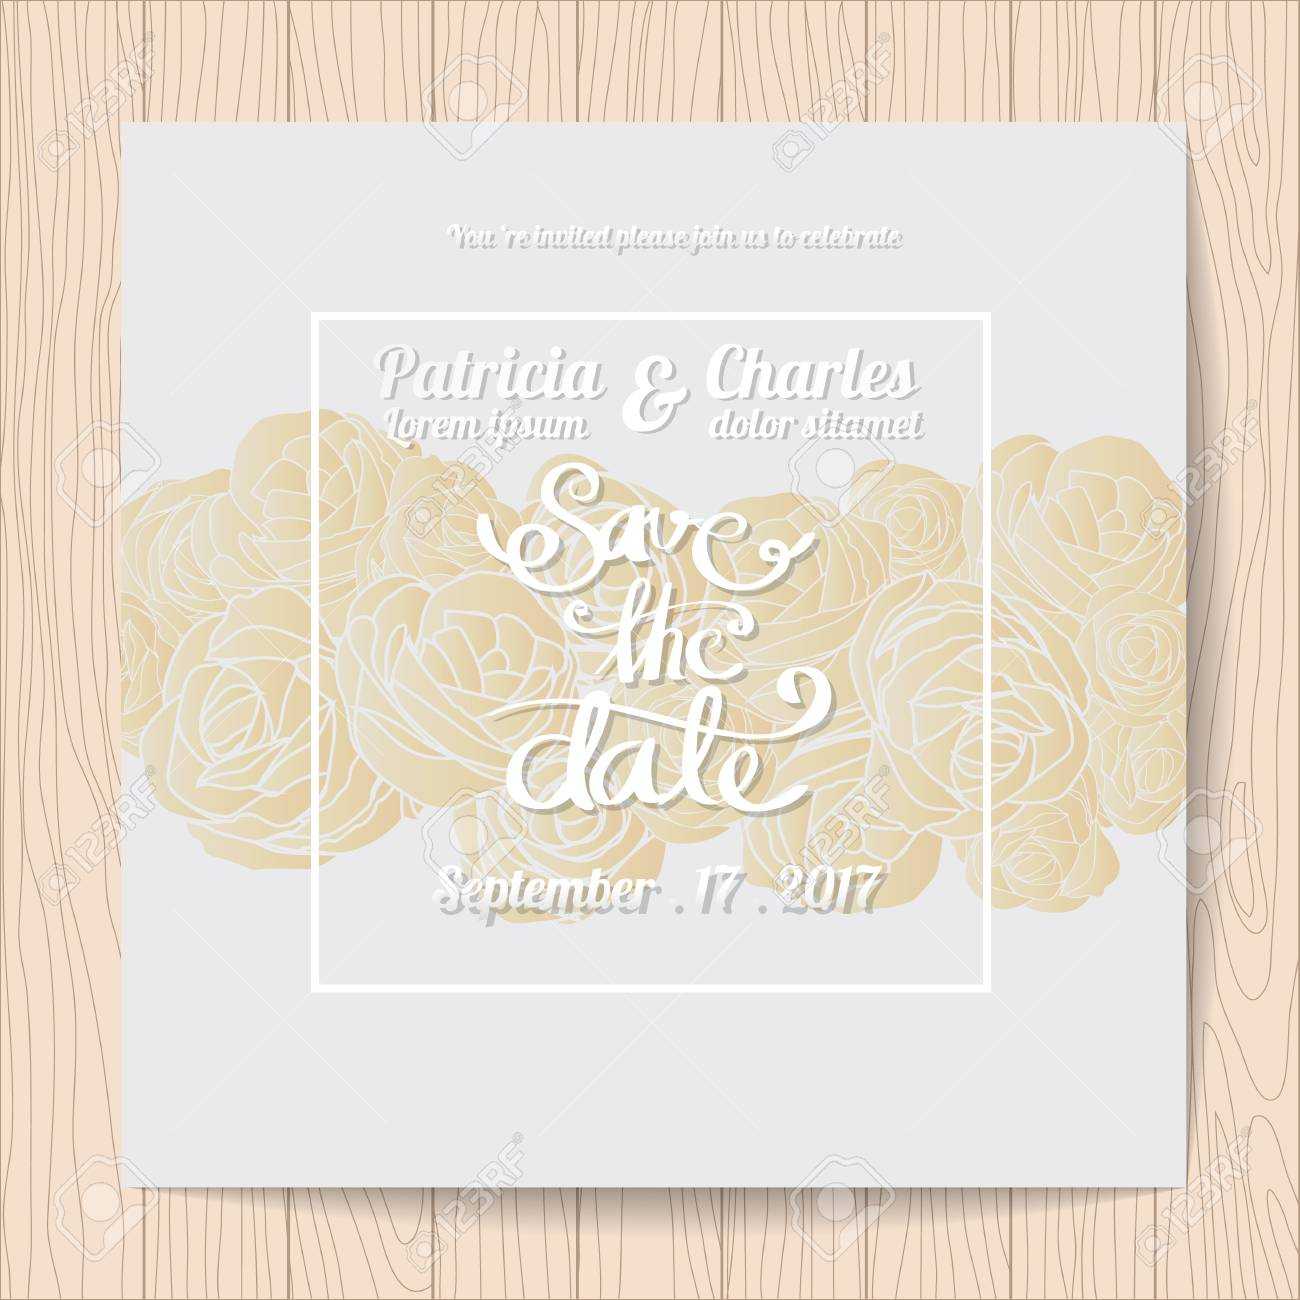 Wedding Invitation Card Templates Pertaining To Celebrate It Templates Place Cards